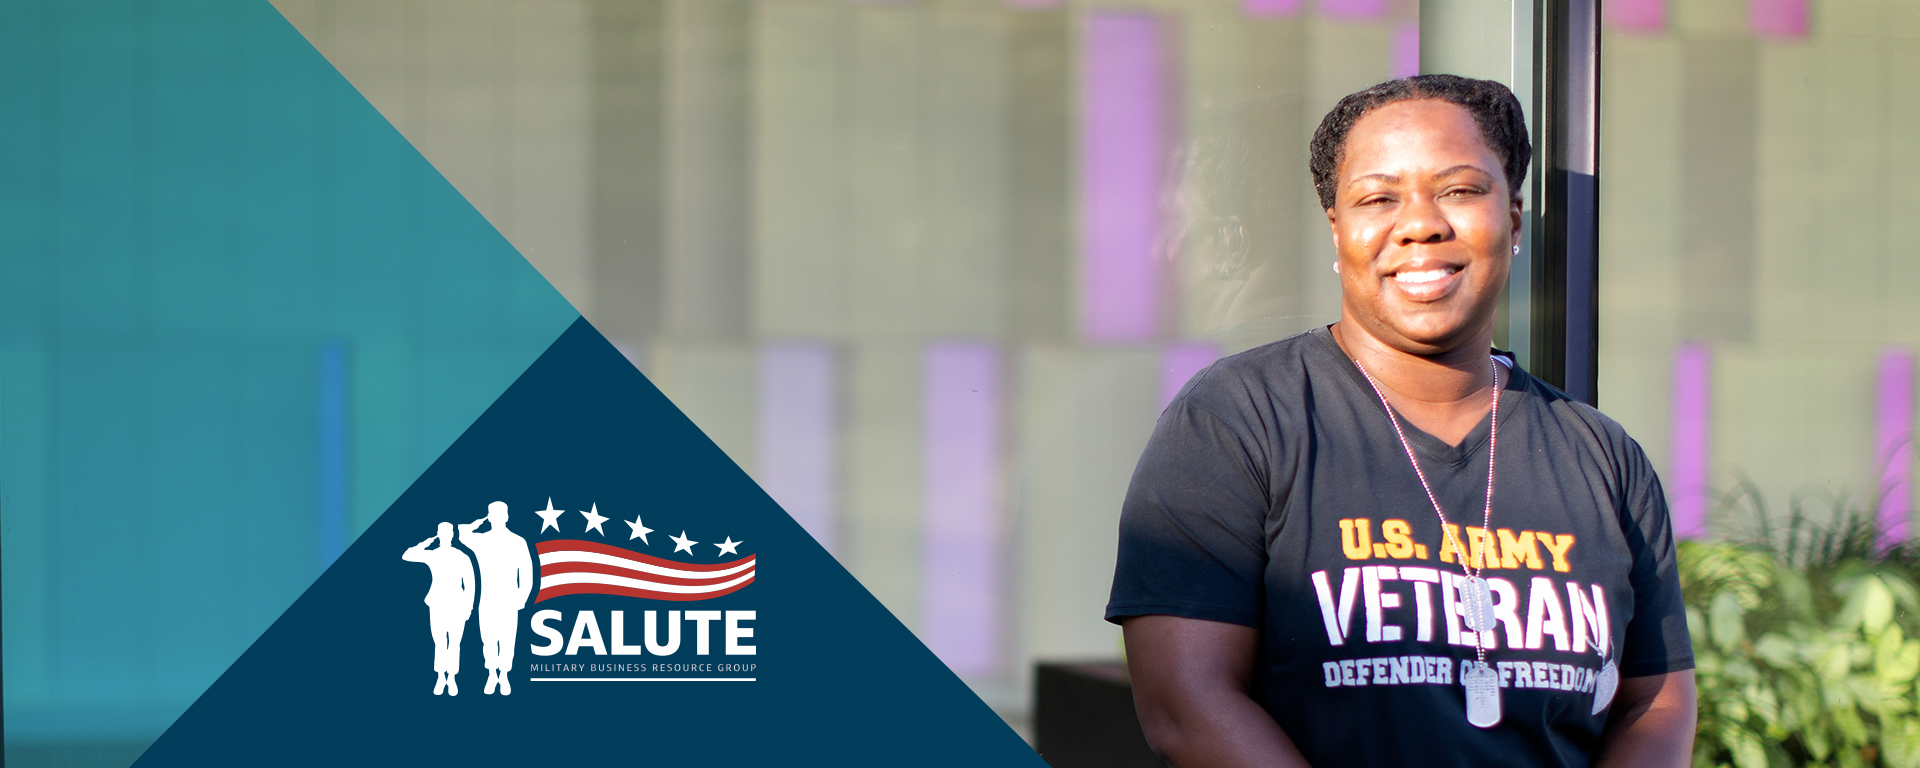 Capital One associate enjoys the weather outside and talks about her experience being supported as a veteran at Capital One